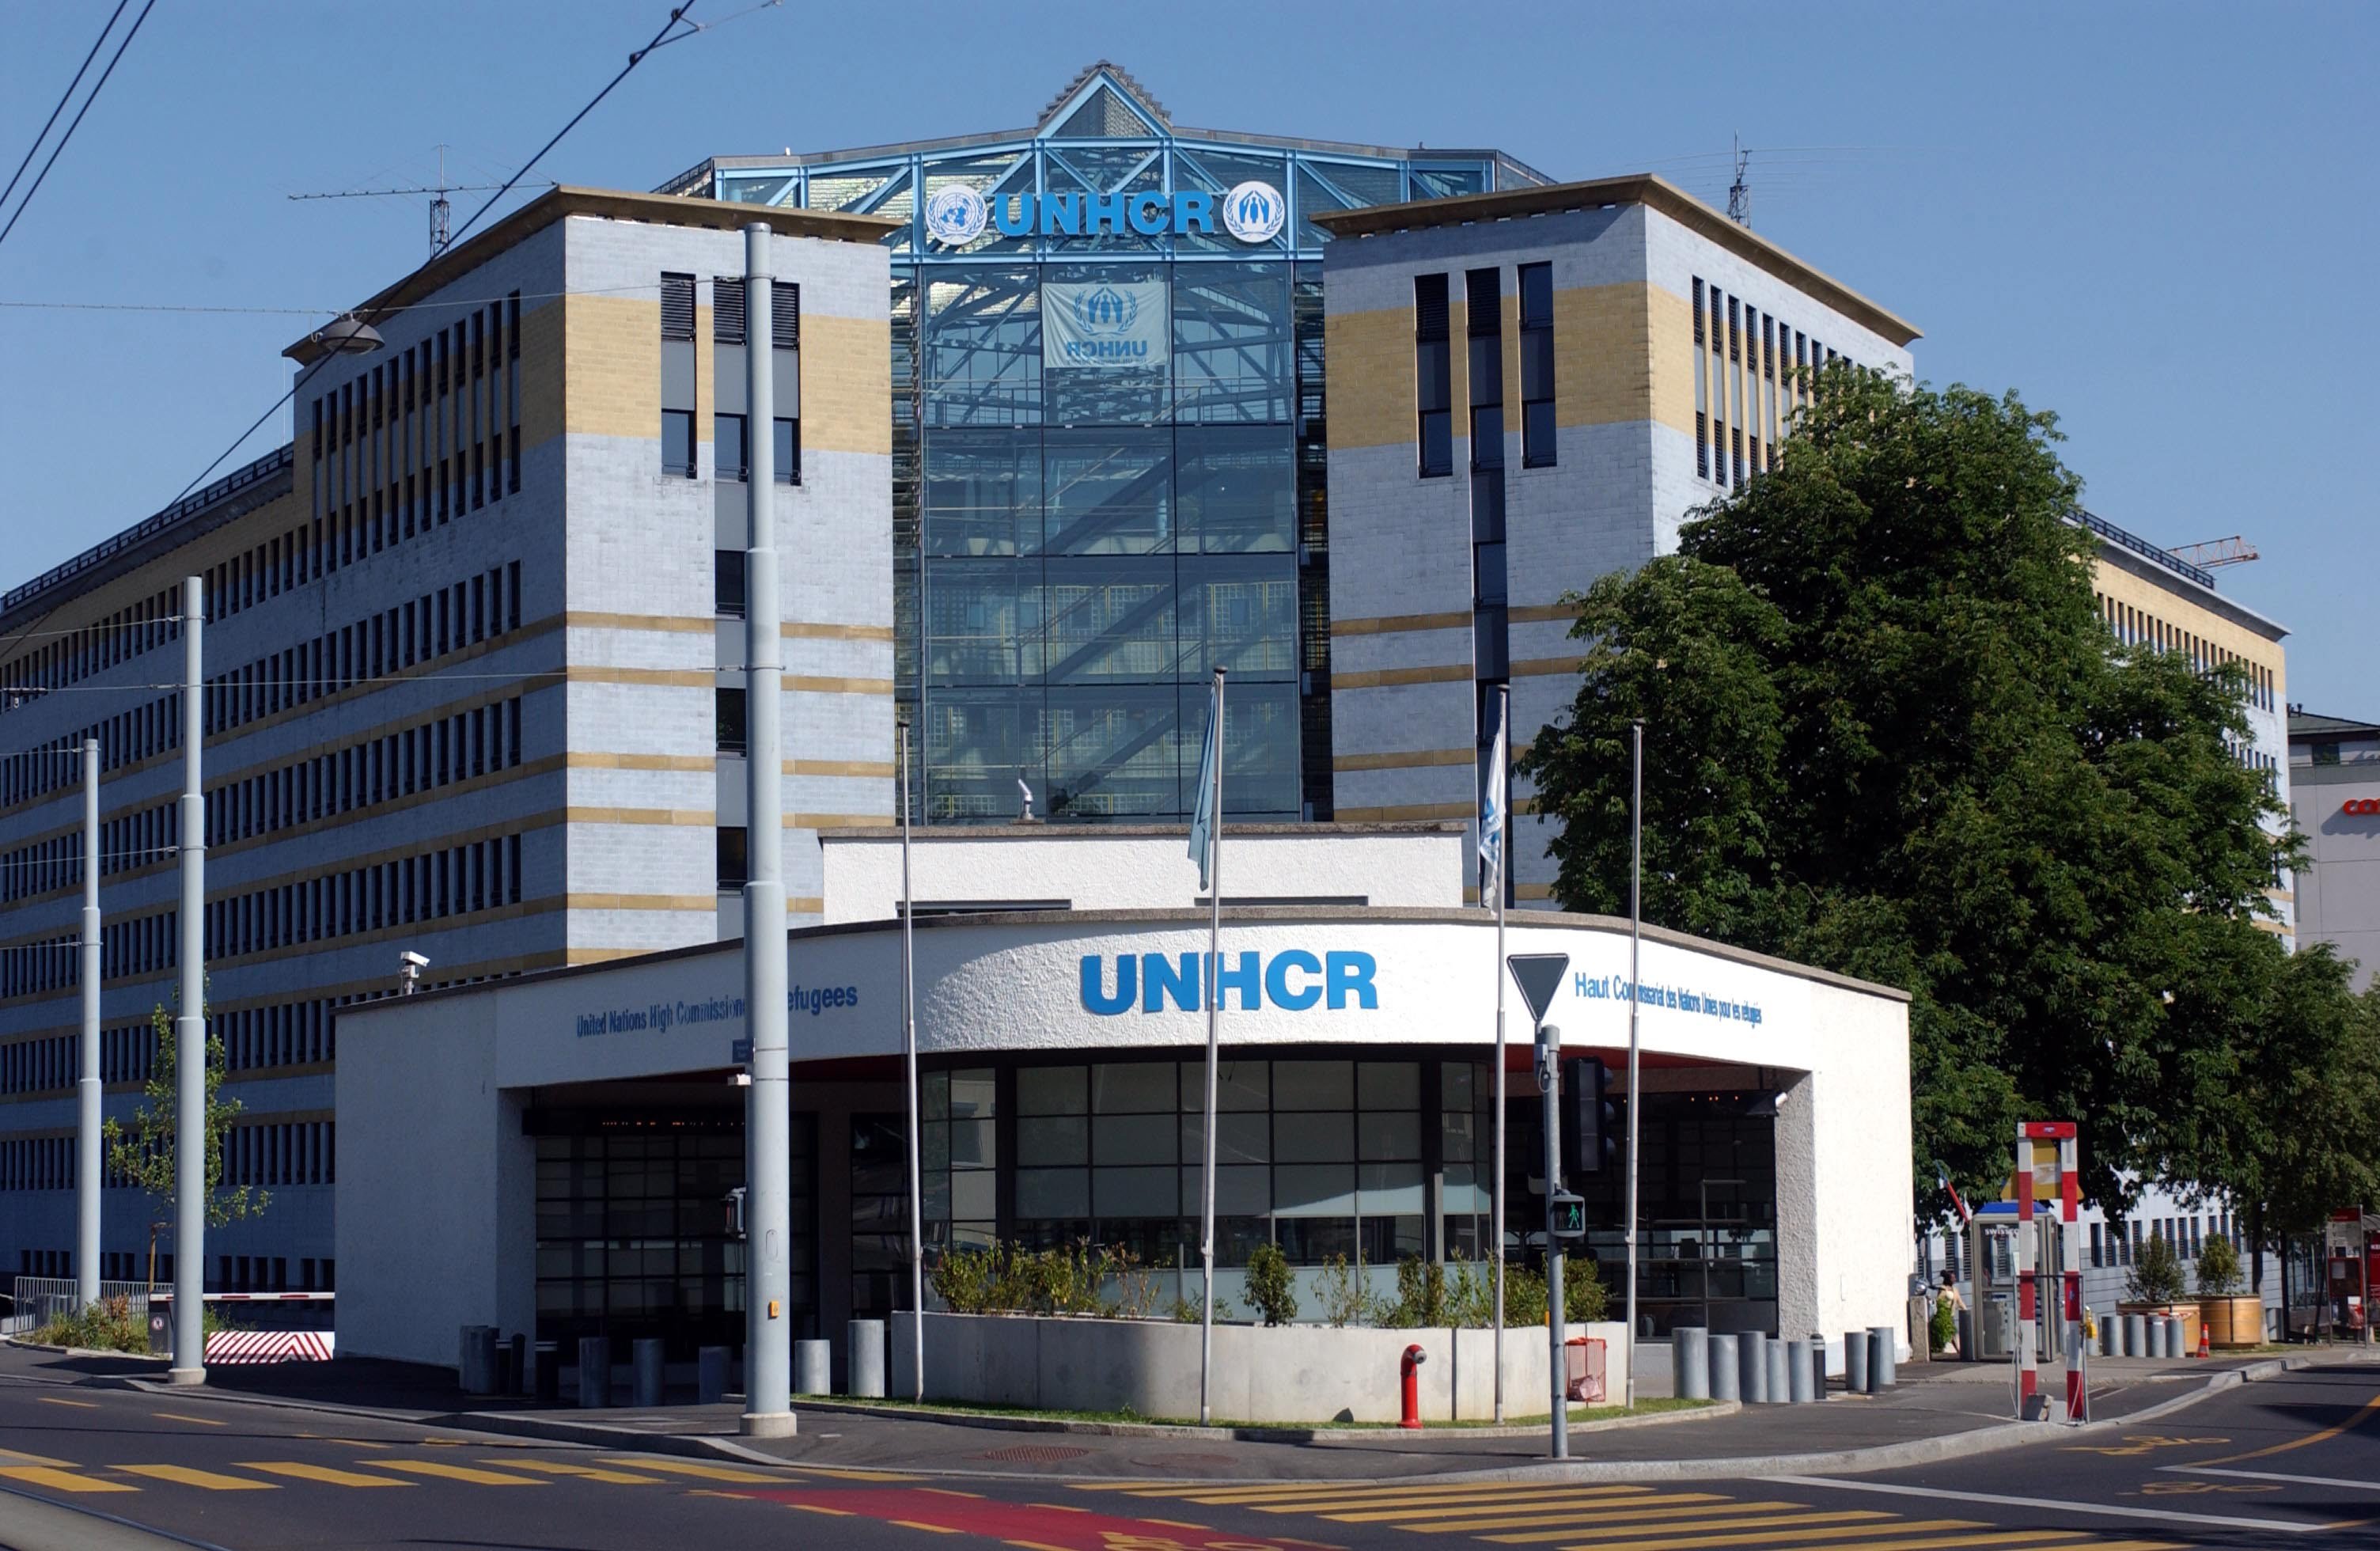 The Office of UNHCR